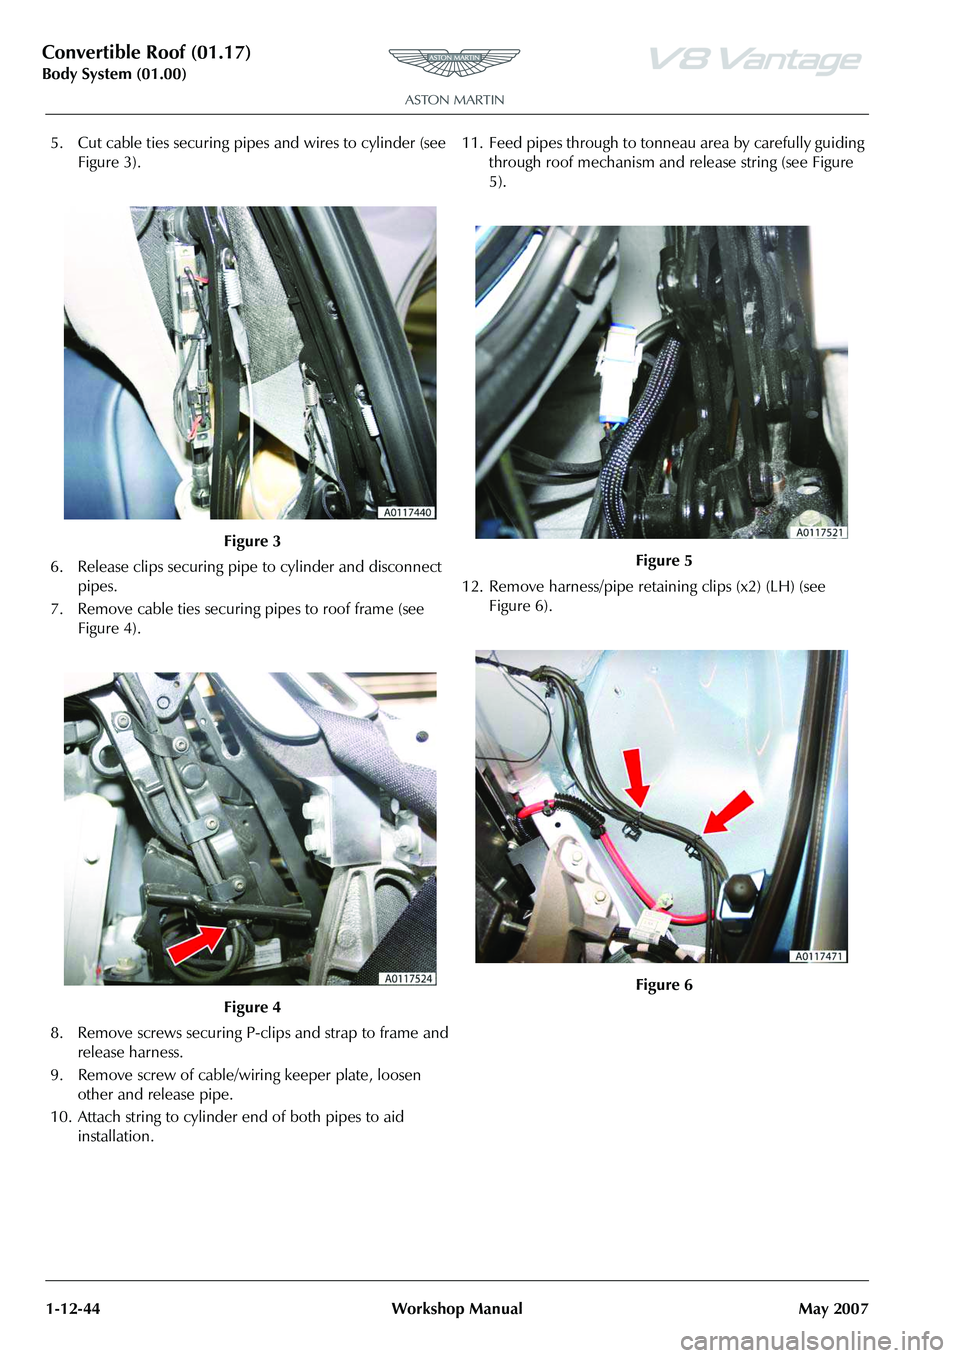 ASTON MARTIN V8 VANTAGE 2010  Workshop Manual Convertible Roof (01.17)
Body System (01.00)1-12-44 Workshop Manual May 2007
5. Cut cable ties securing pipes and wires to cylinder (see  Figure 3).
6. Release clips securing pipe to cylinder and disc